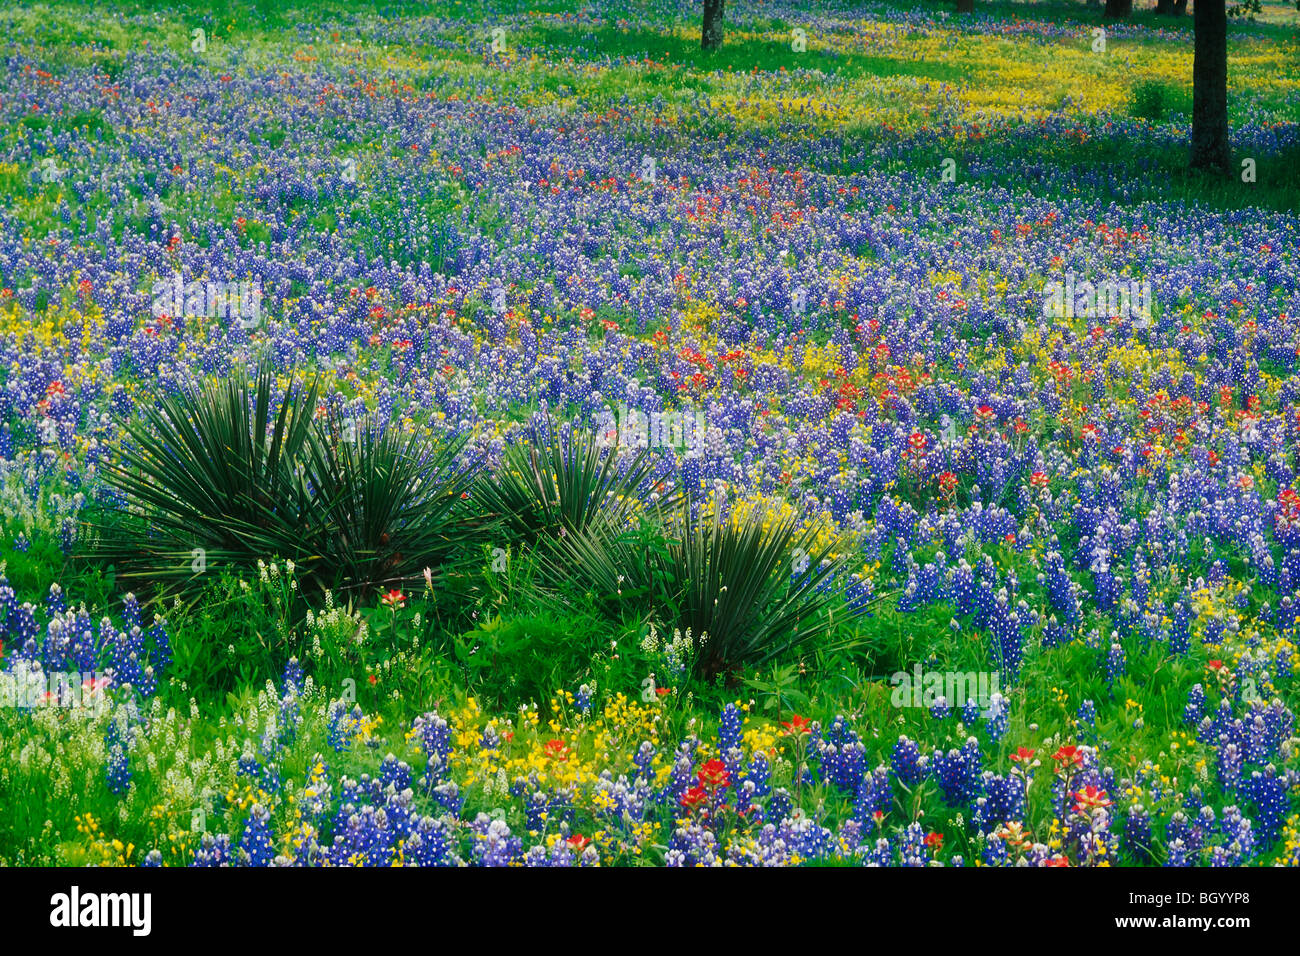 Field of Bluebonnets and Paintbrush, Texas Hill Country Stock Photo